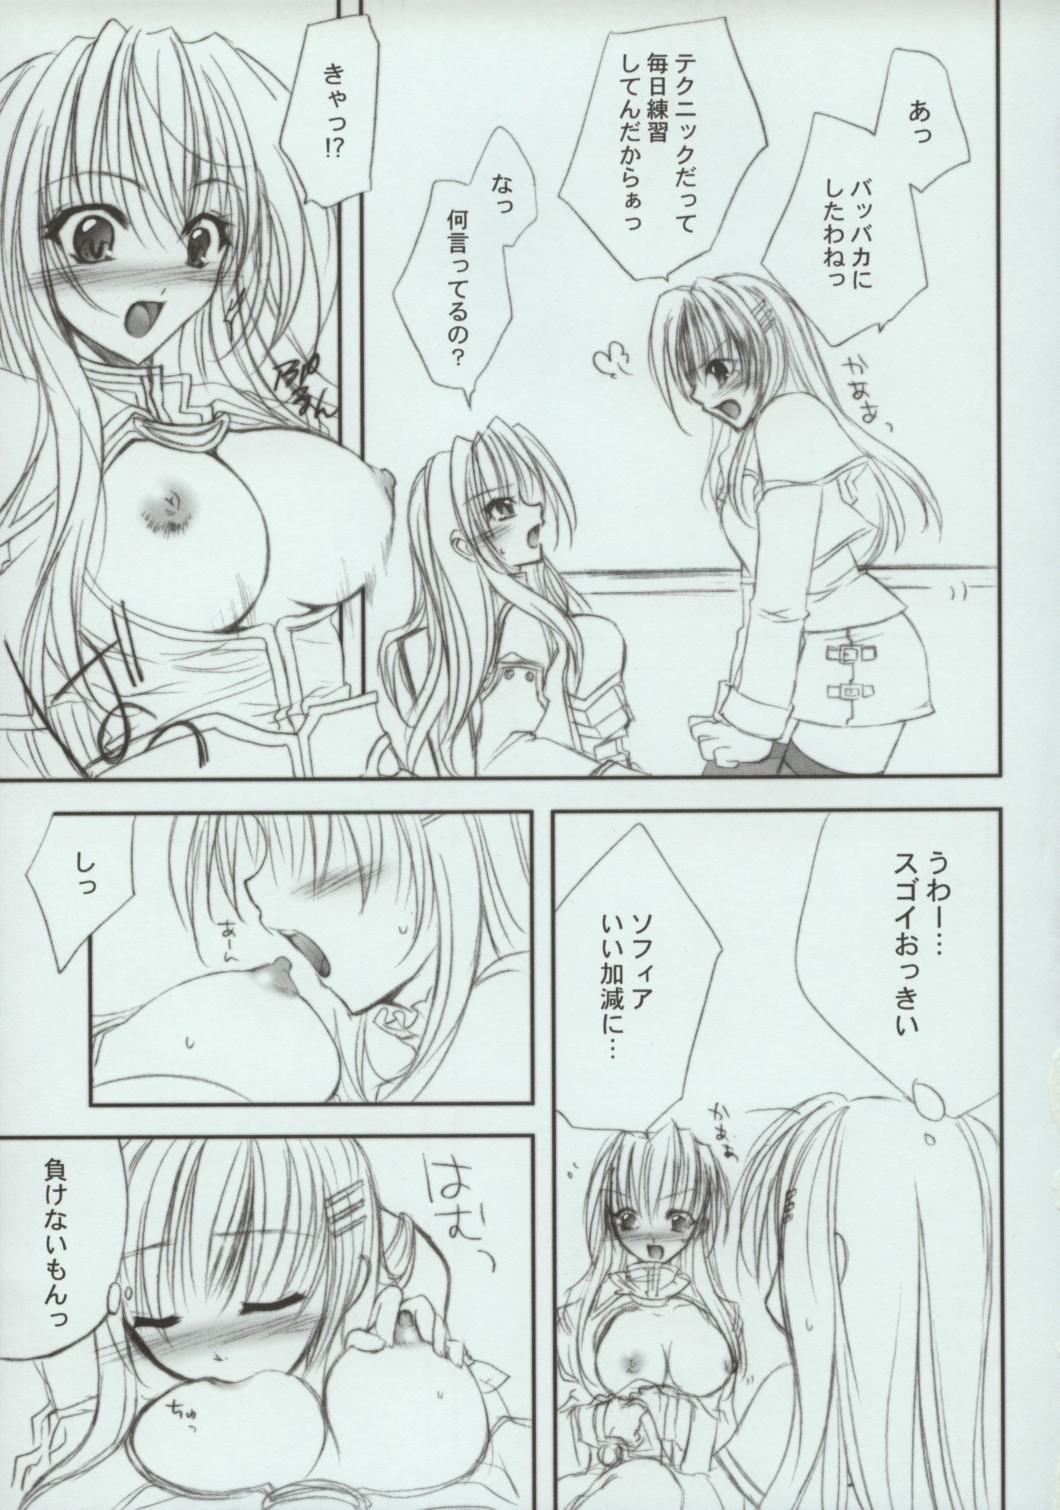 Blowjobs FOLLOW - Star ocean 3 Real Amateur - Page 6